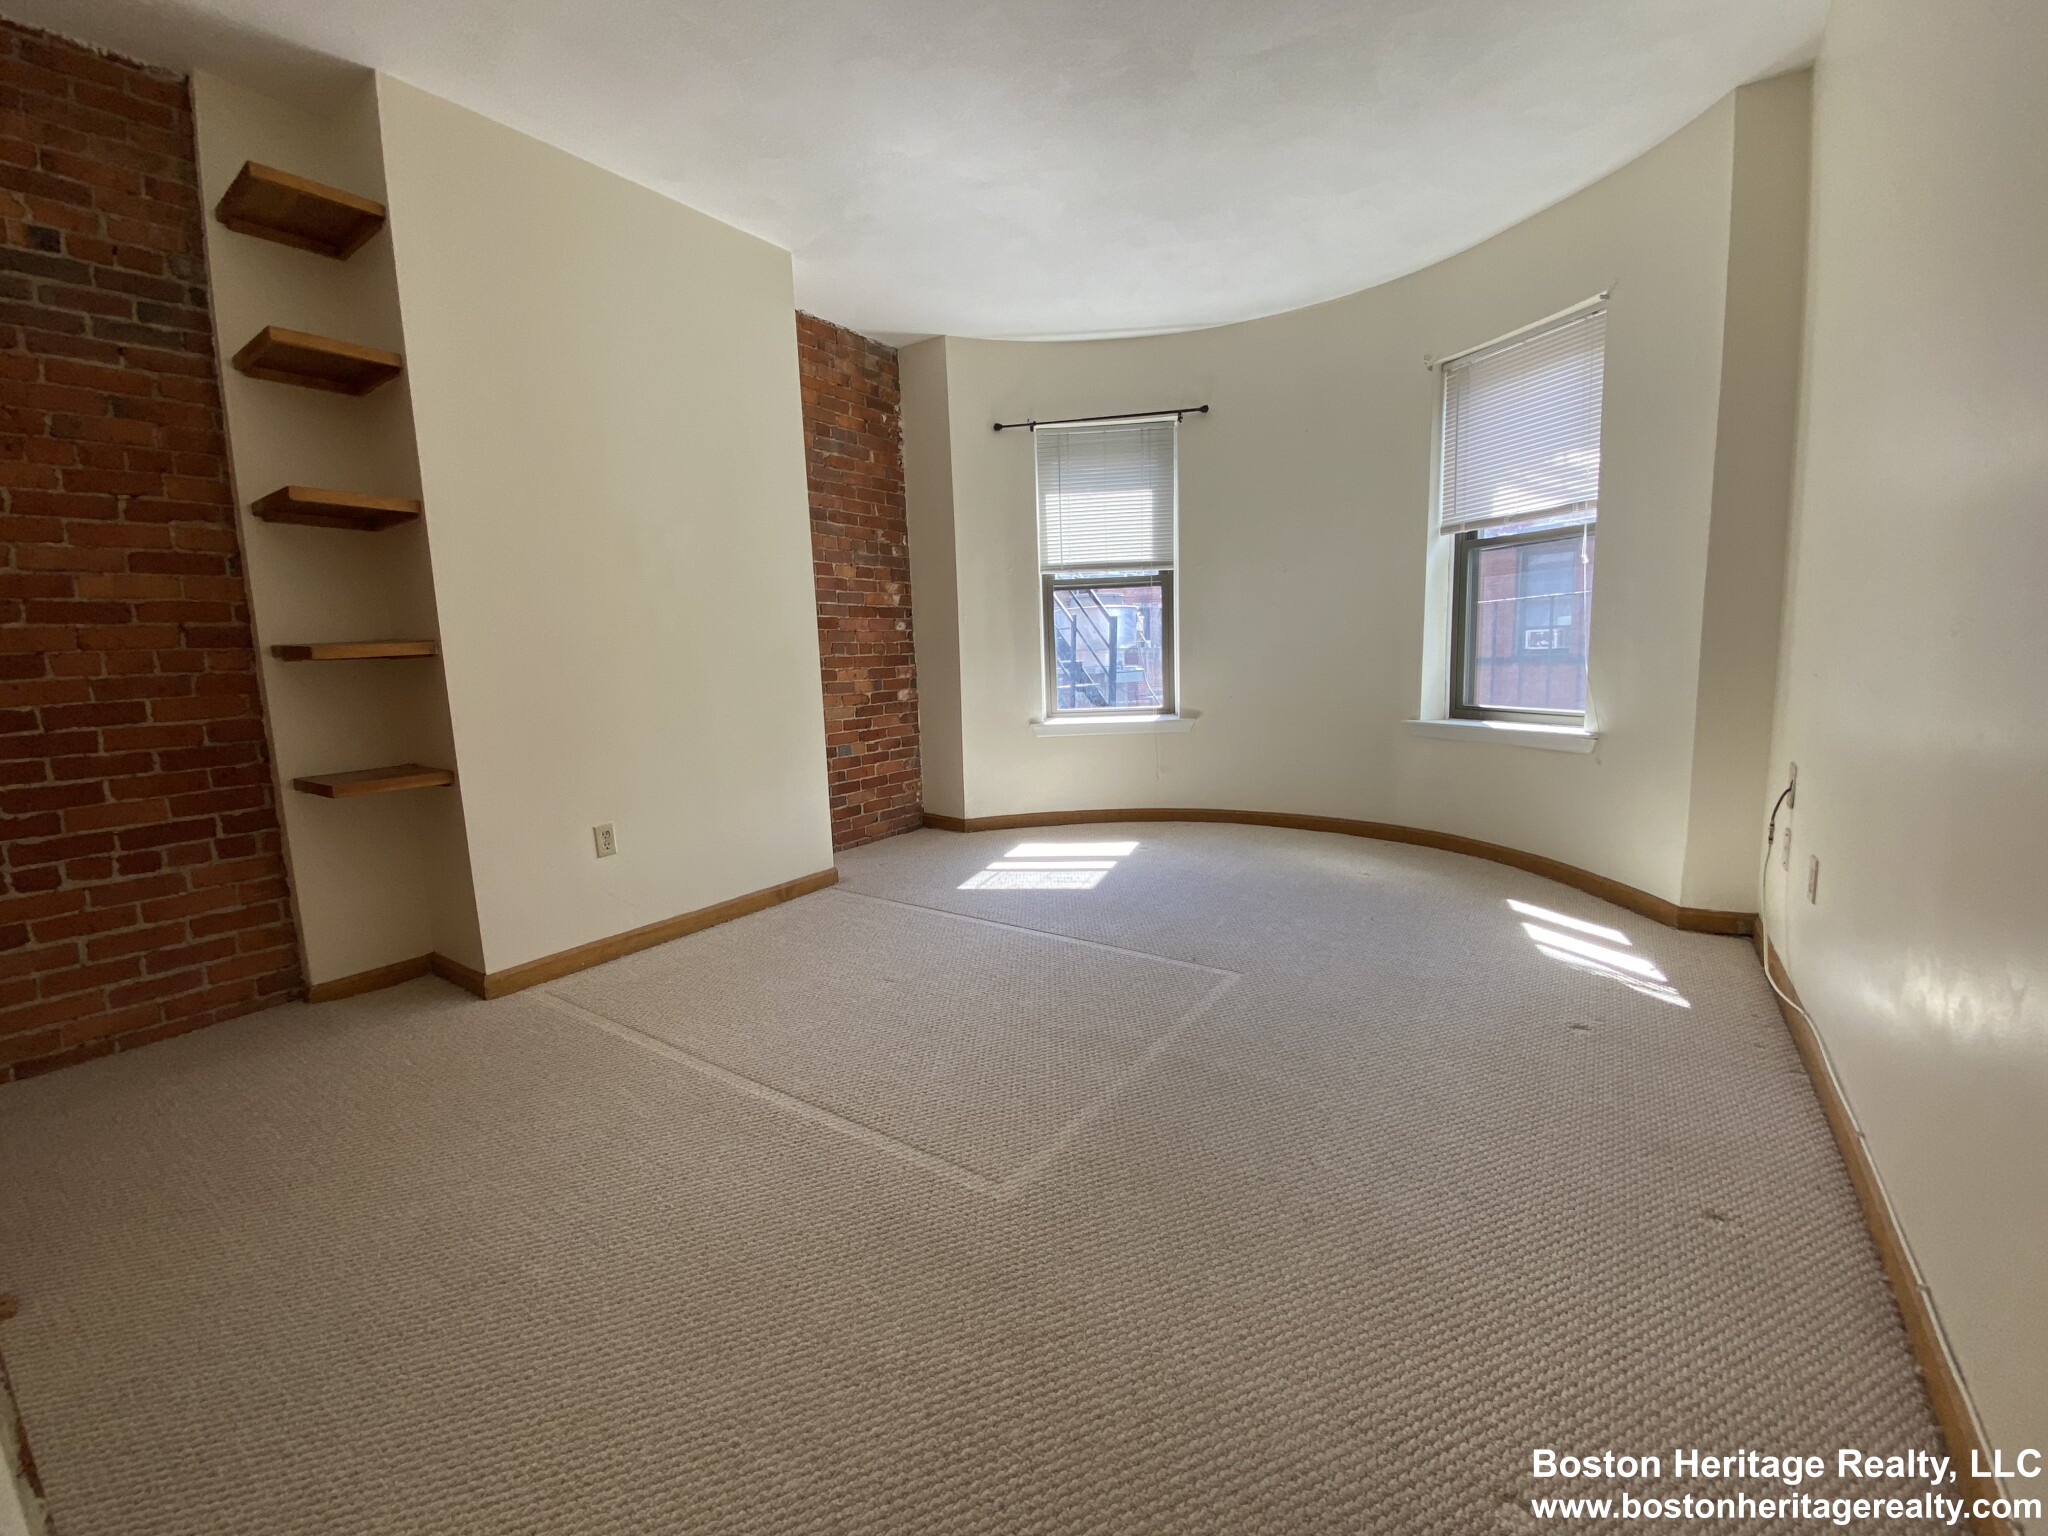 2 Beds, 1 Bath apartment in Boston, Fenway for $3,200